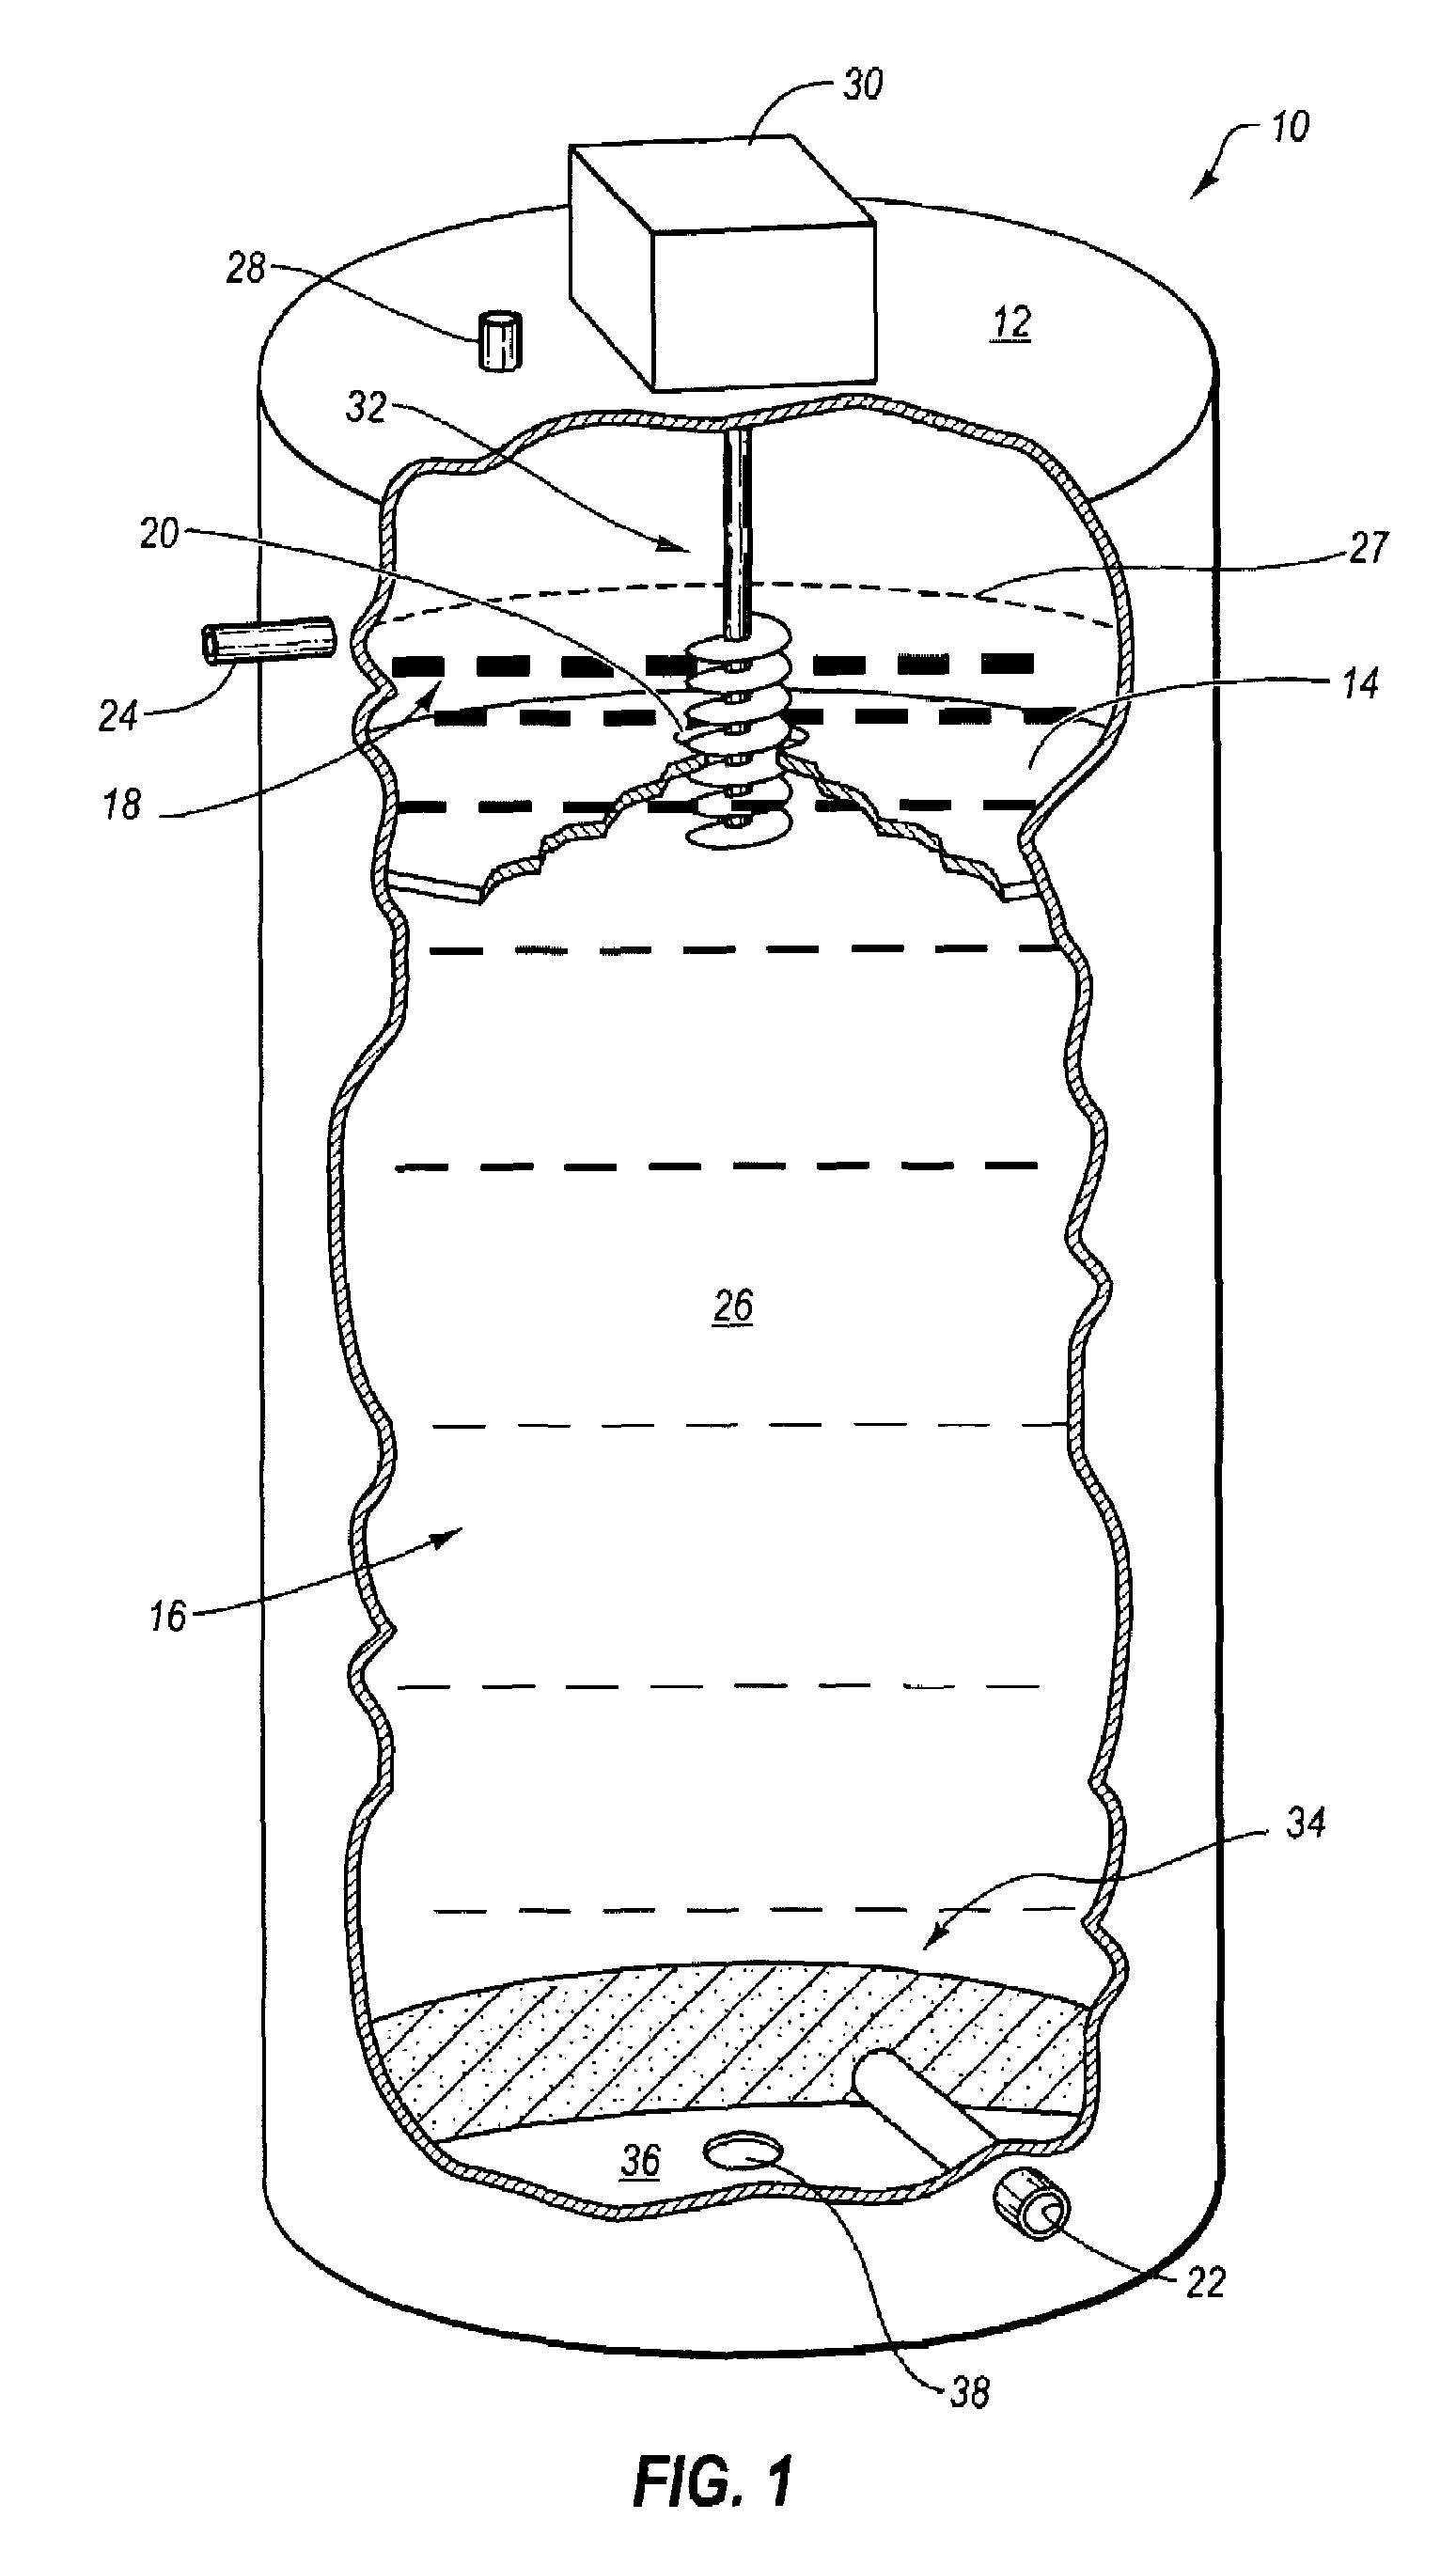 Methods for removal of non-digestible matter from an upflow anaerobic digester